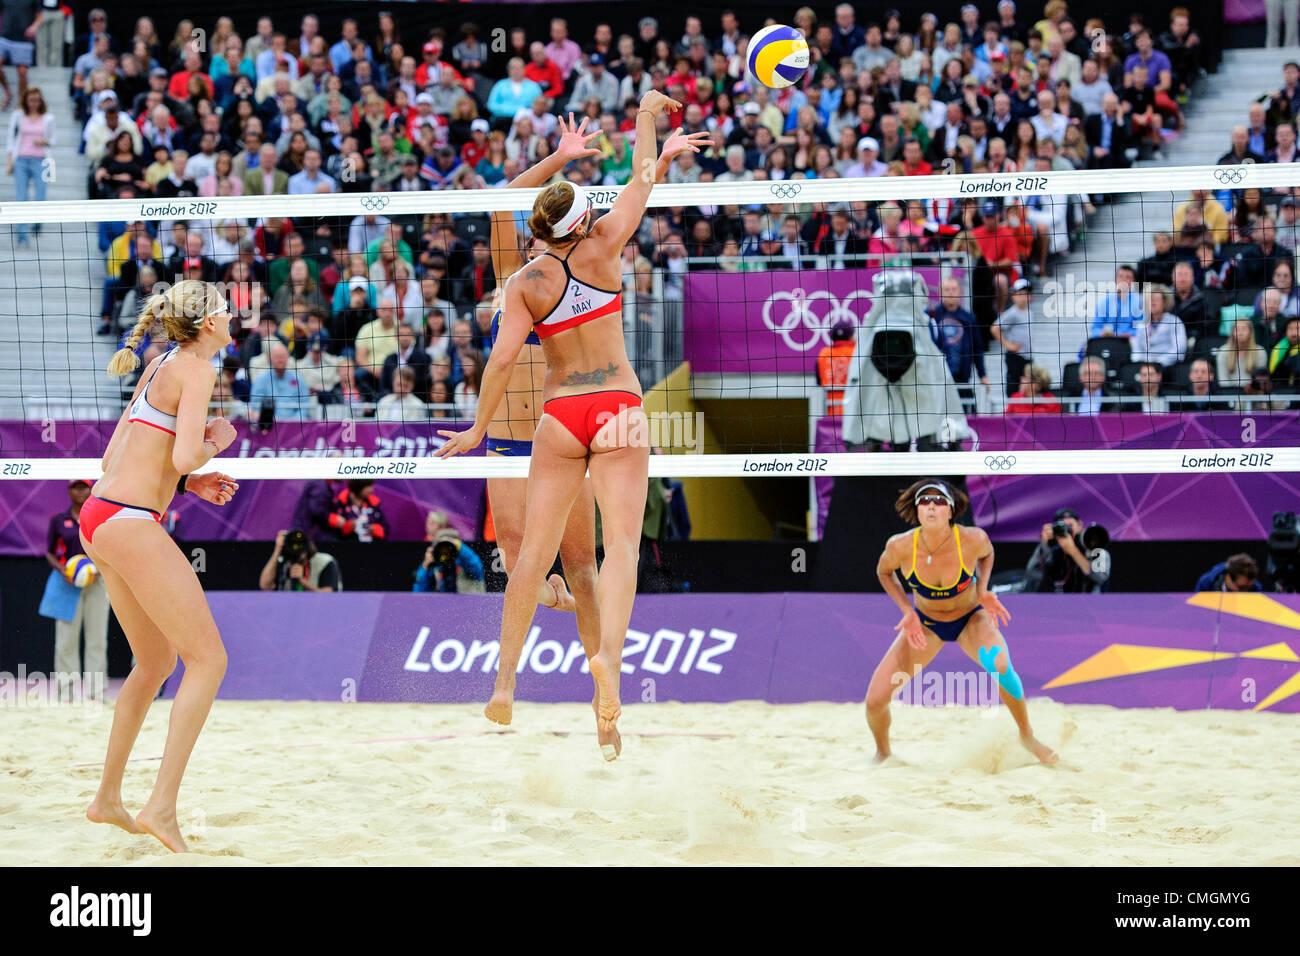 07 08 12 London England Americas Misty May Treanor And Kerri Walsh Jennings Usa In Action In The First Womens Beach Volleyball Semifinal Between The Usa Pair And China On Day 11 Of The London